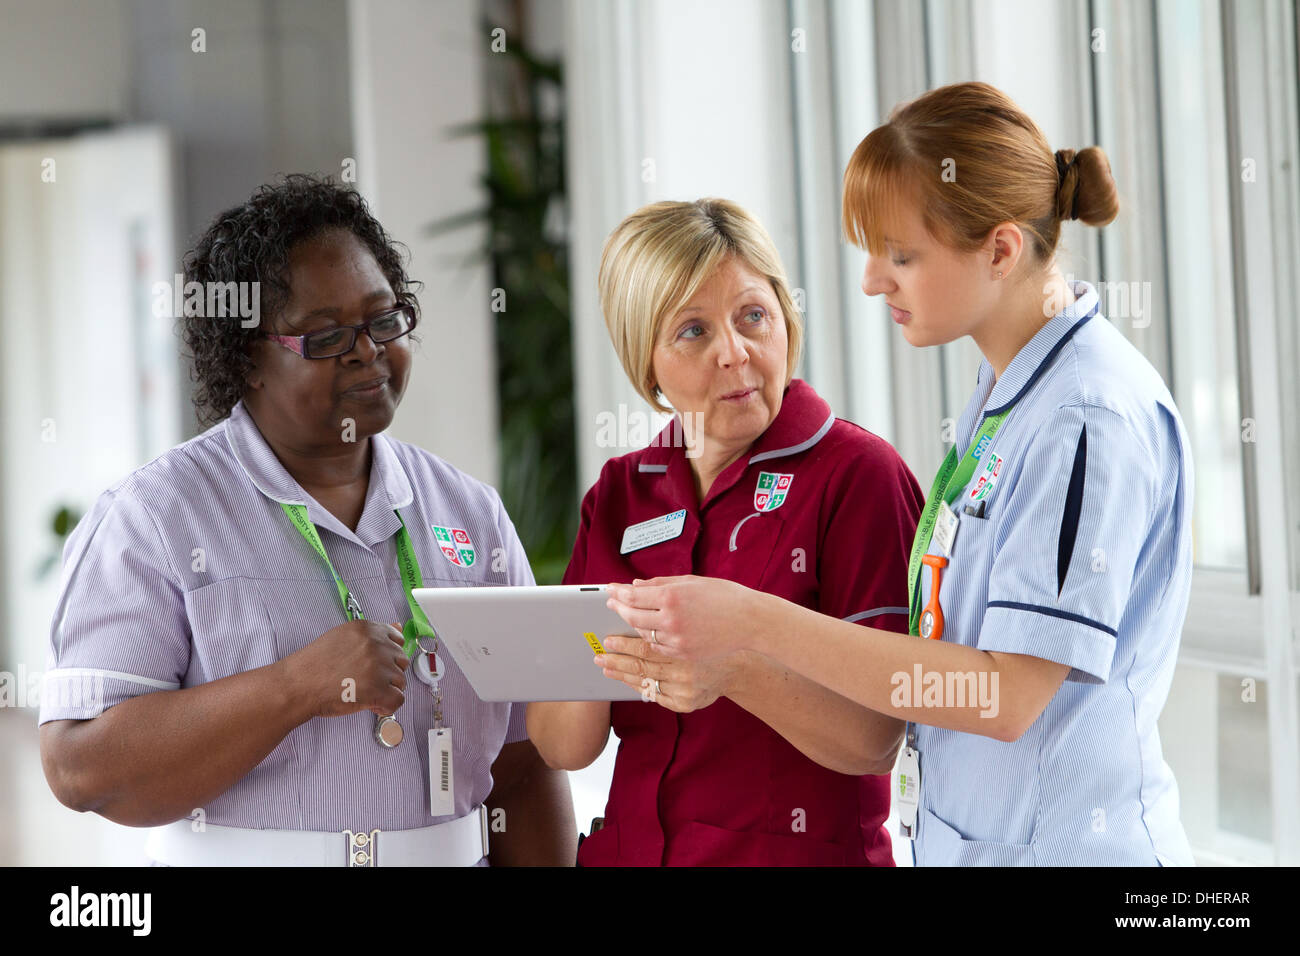 A group of three nurses discuss work on a tablet computer UK Stock Photo